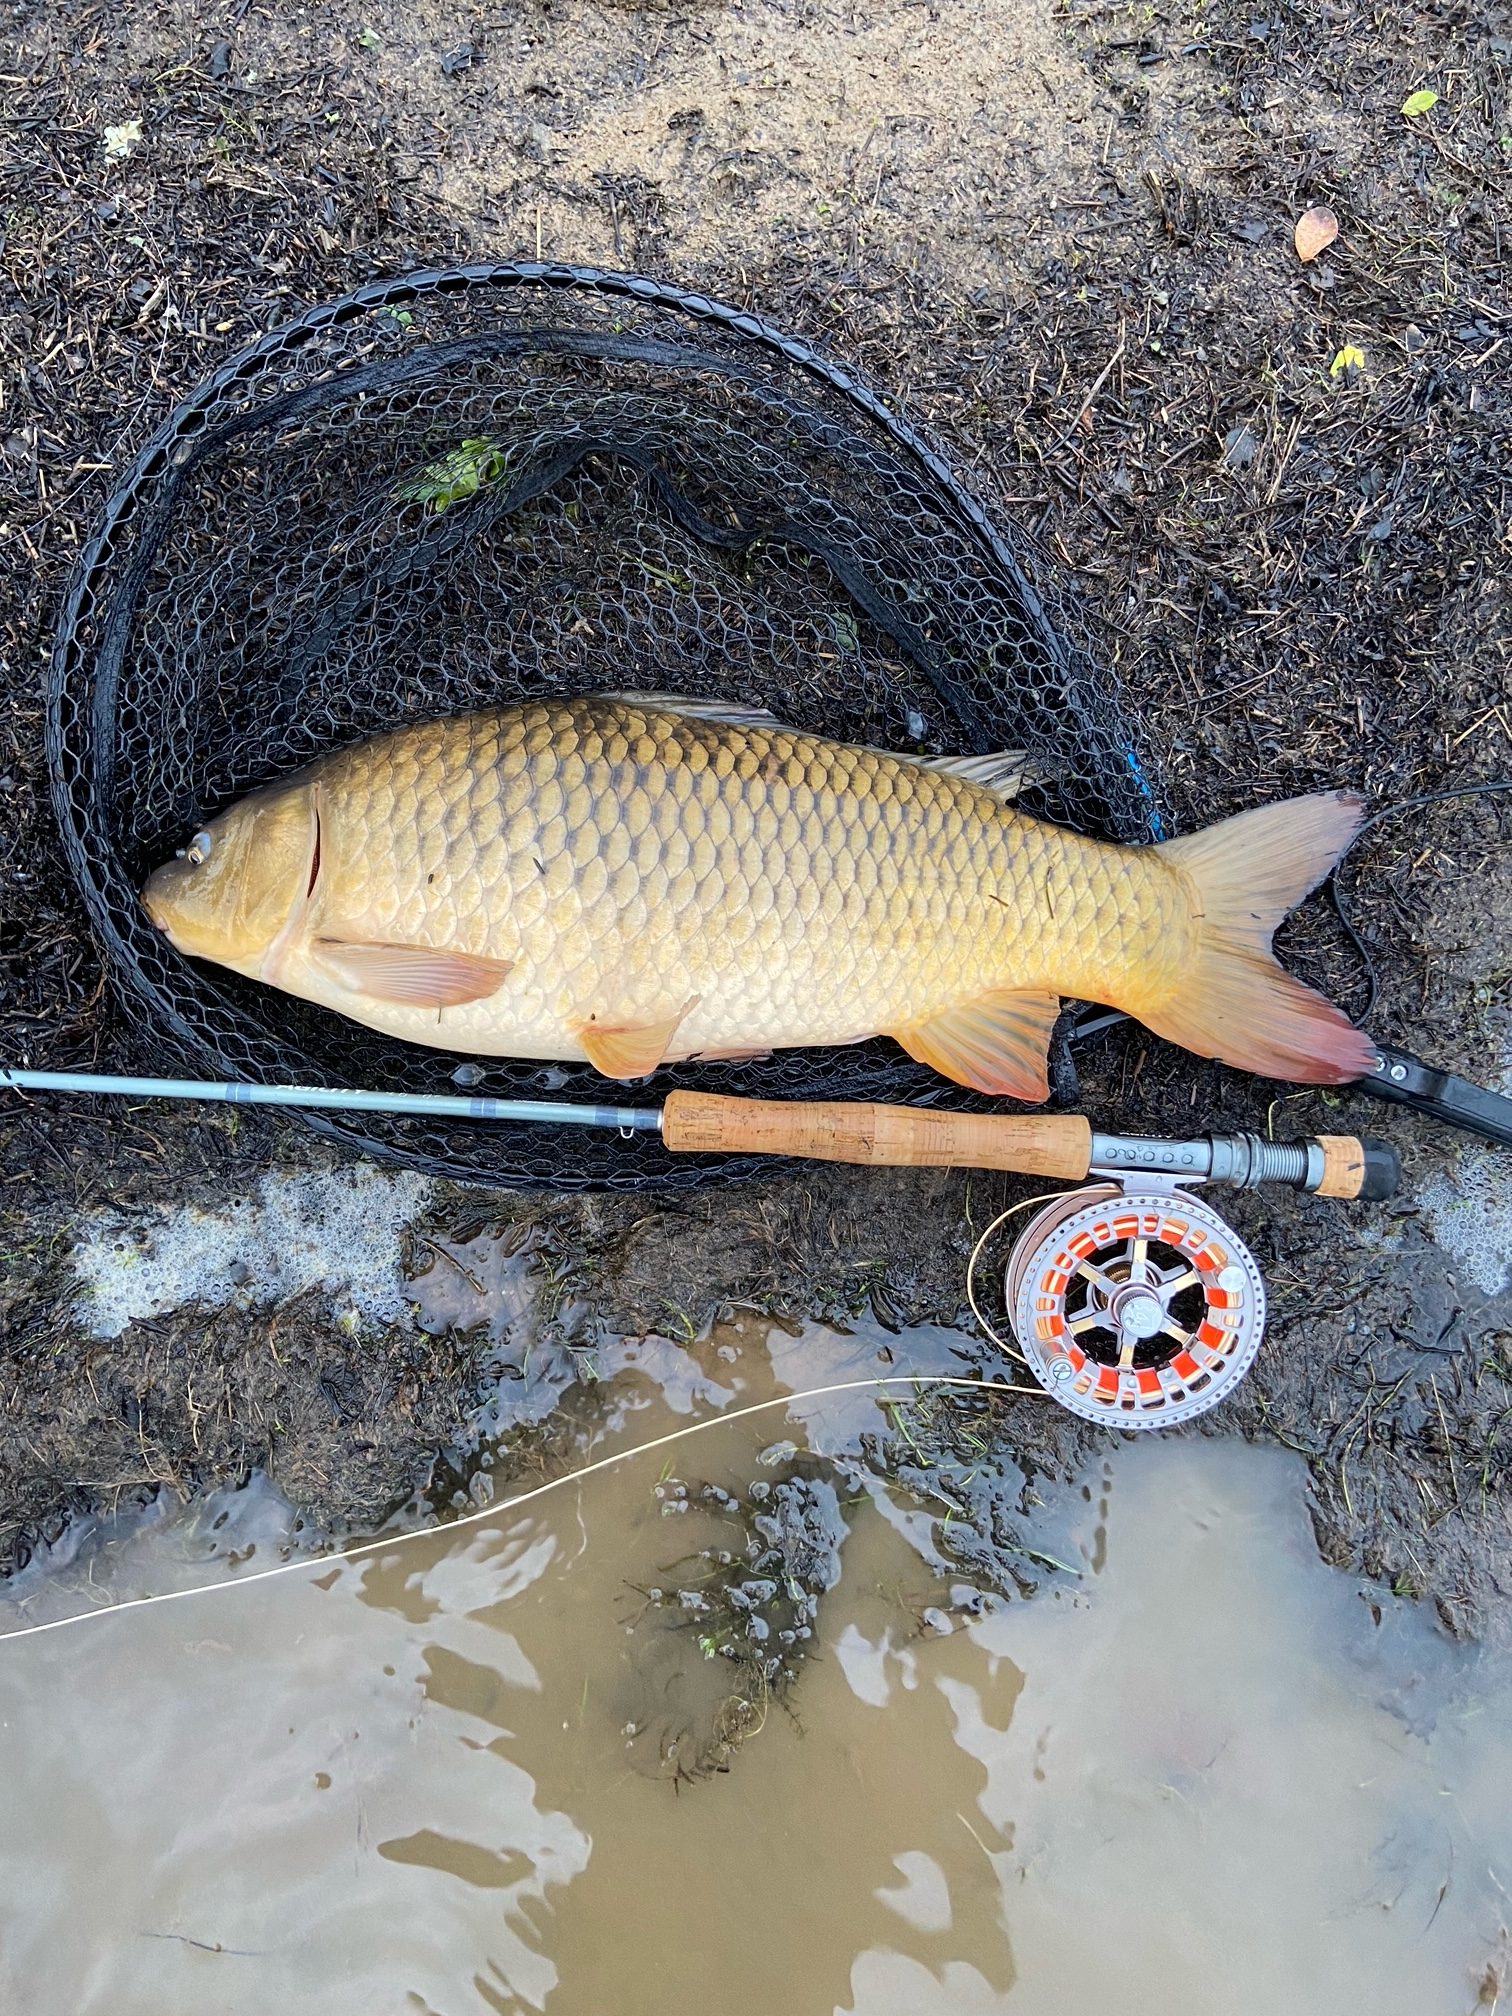 South West Lakes Trout Fisheries Report August 2021 - North Devon & Exmoor  Angling News - The latest up to date information